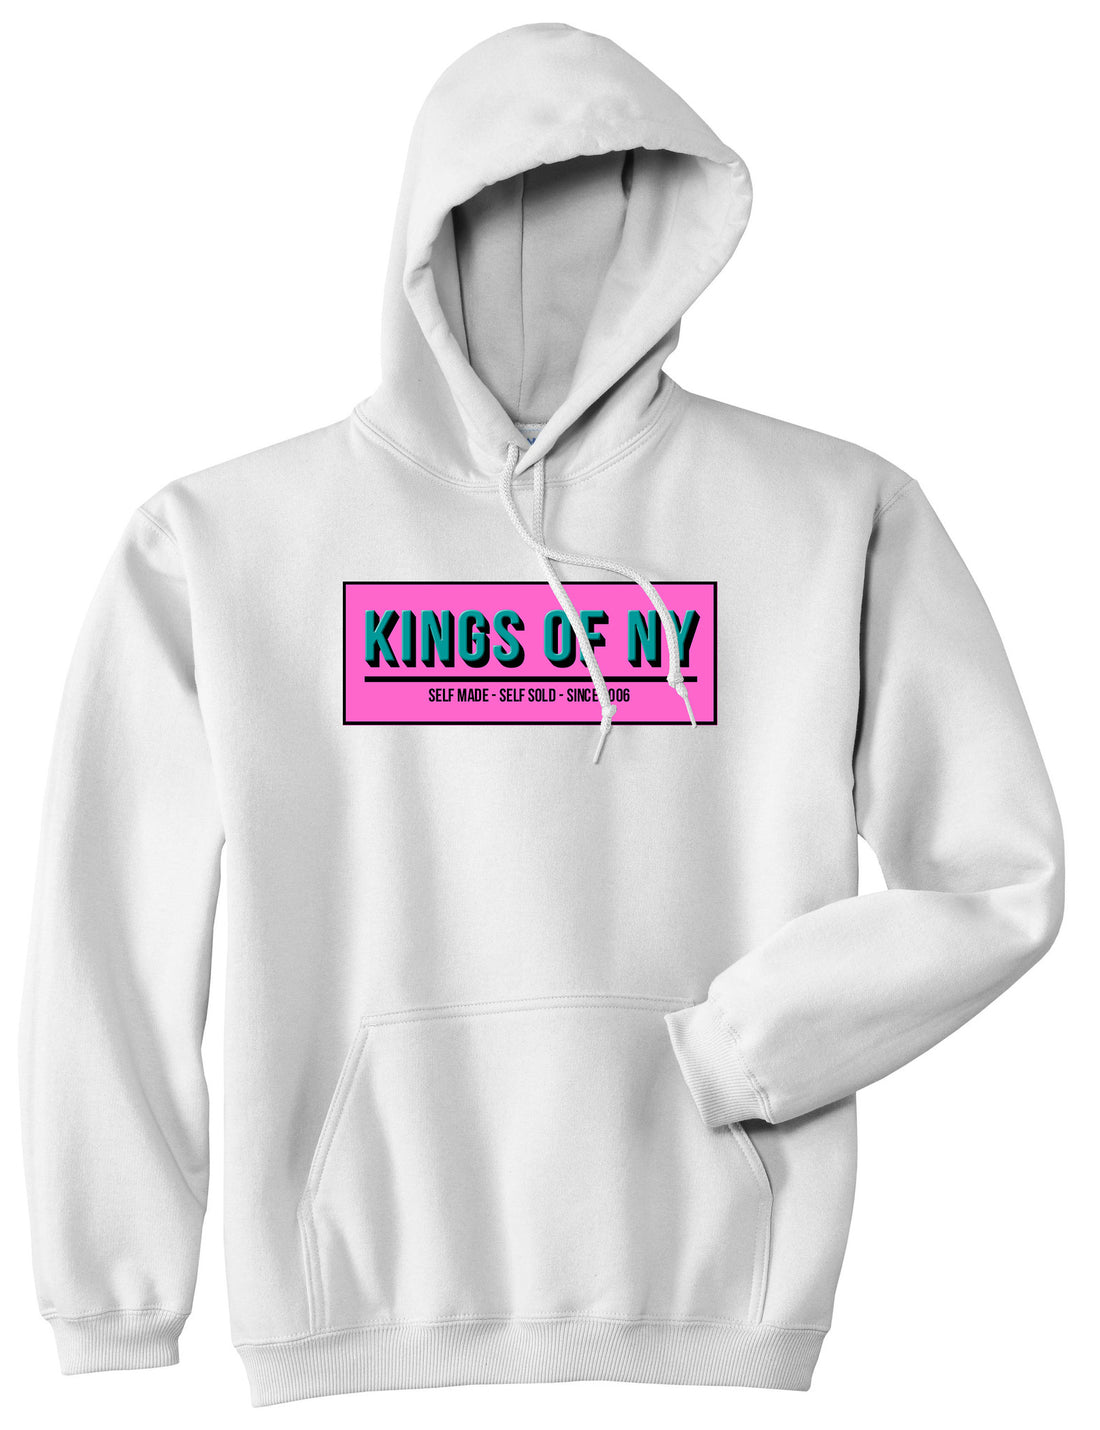 Self Made Self Sold Pink Pullover Hoodie in White